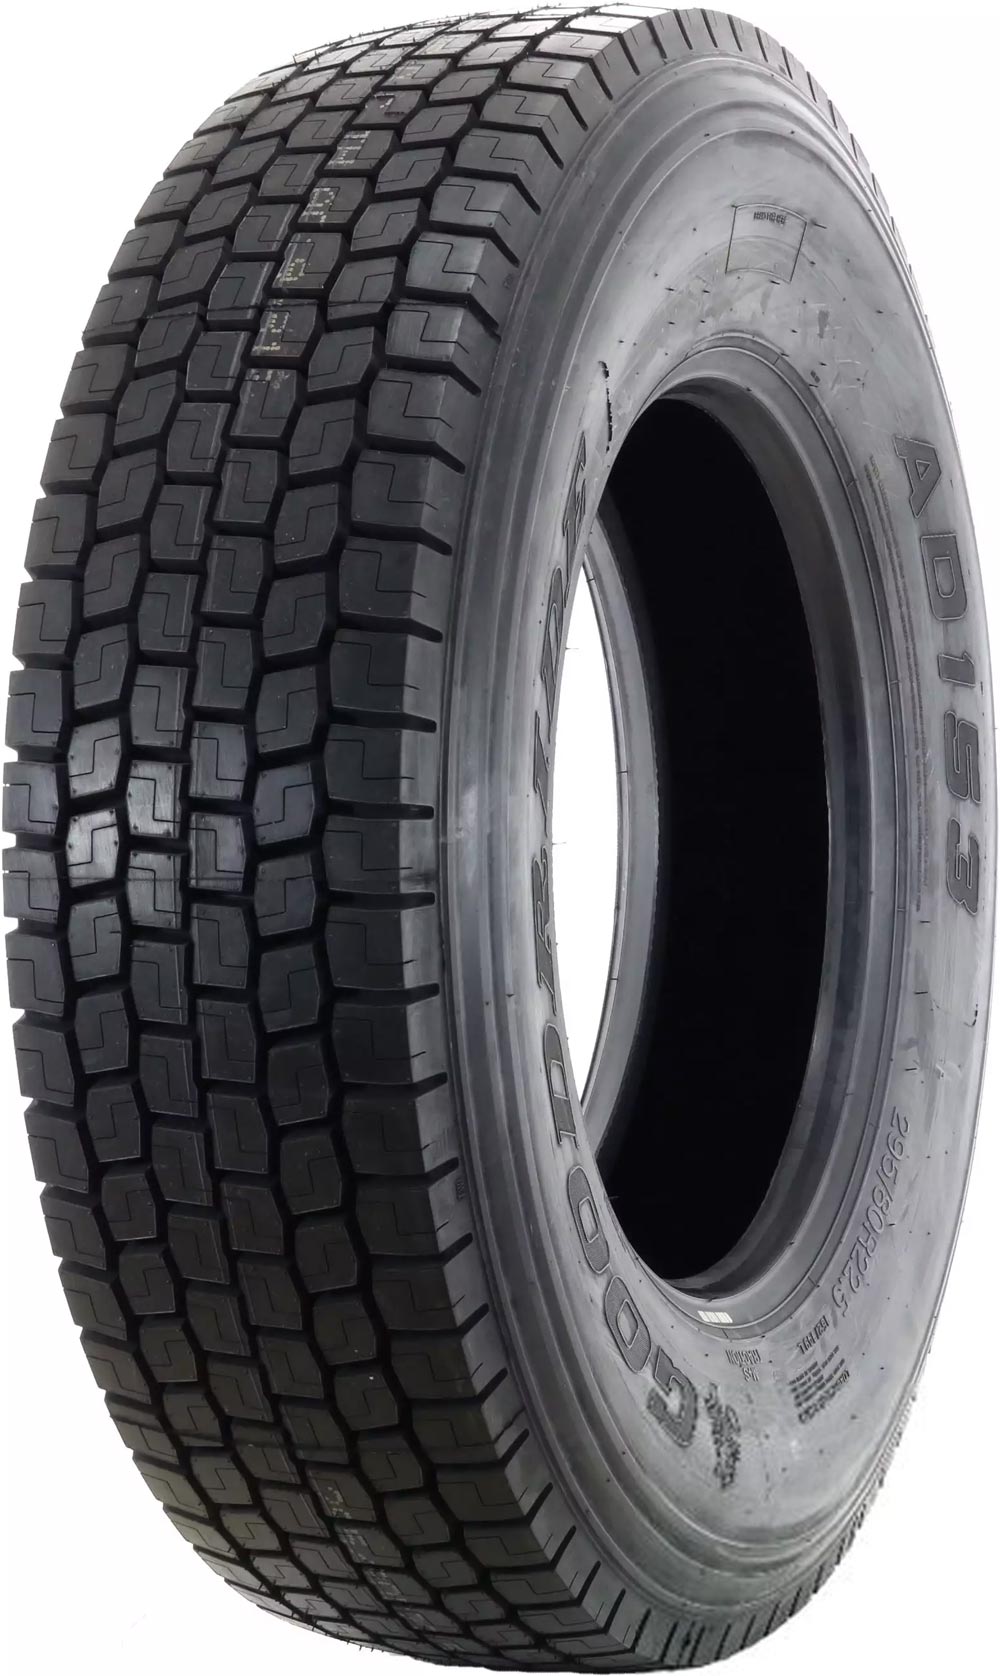 product_type-heavy_tires GOODRIDE AD153 295/80 R22.5 152L